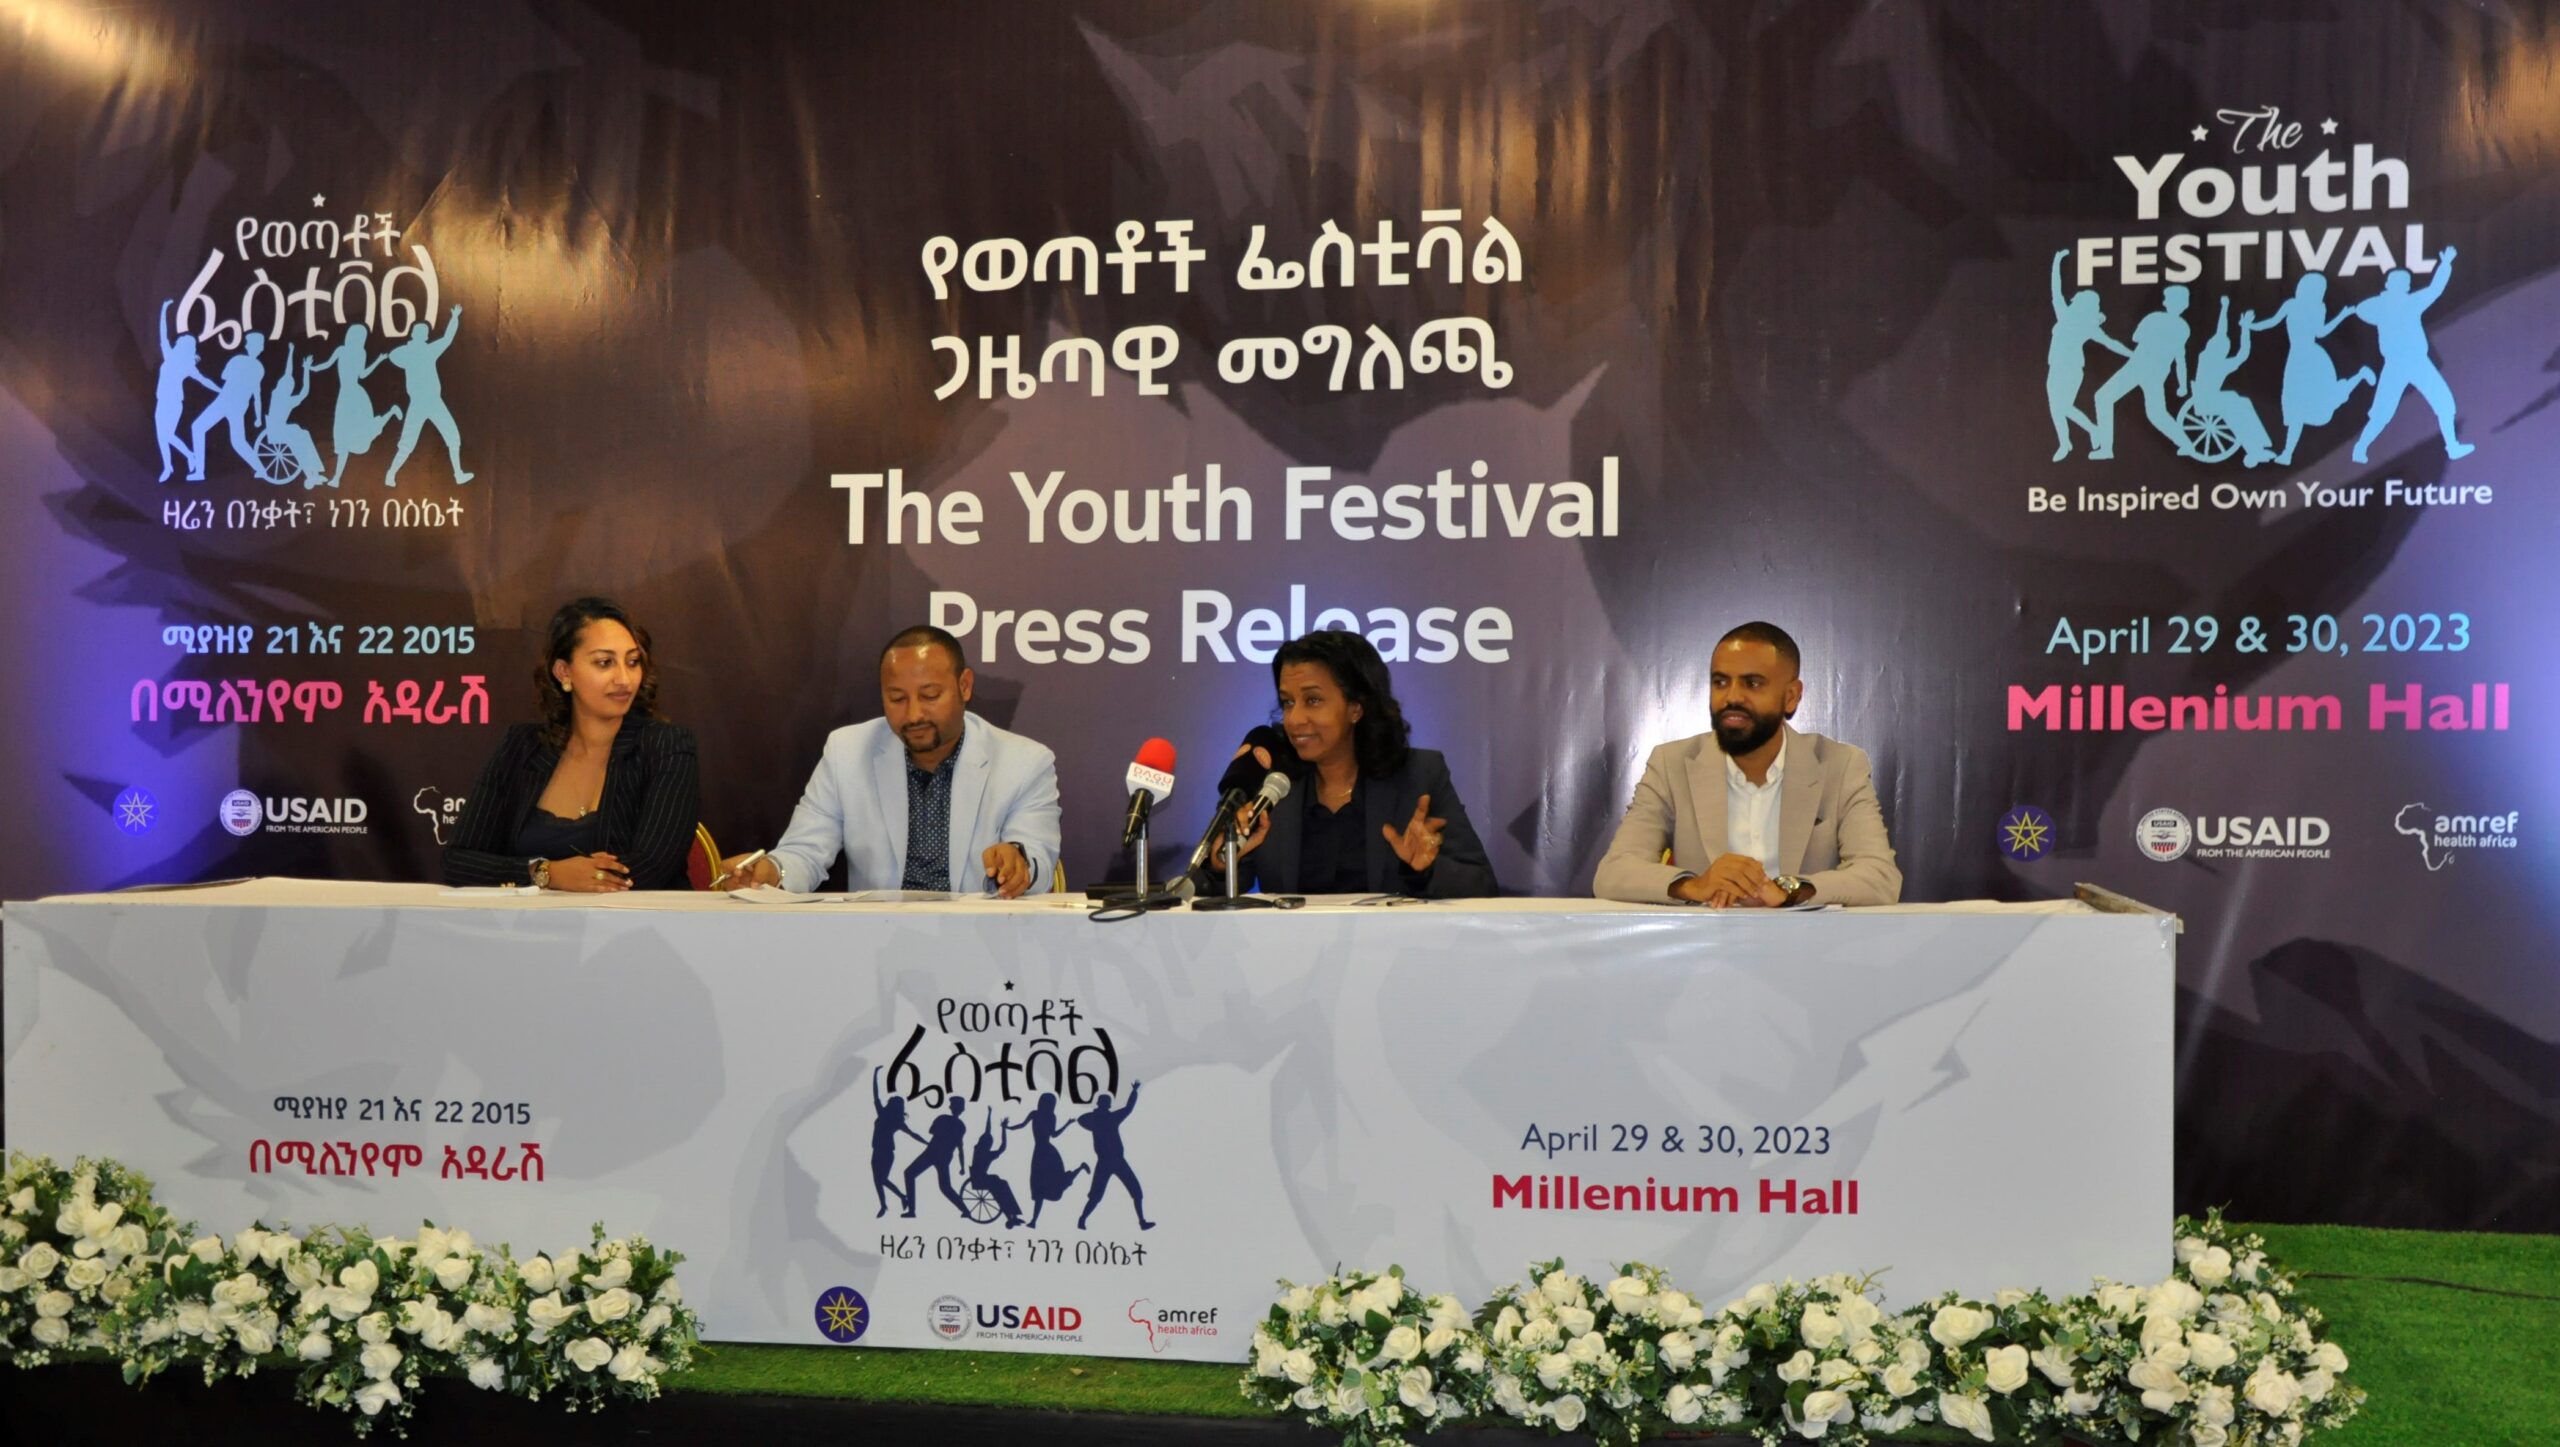 The Youth Festival 2023 “Be Inspired, Own Your Future” to celebrate